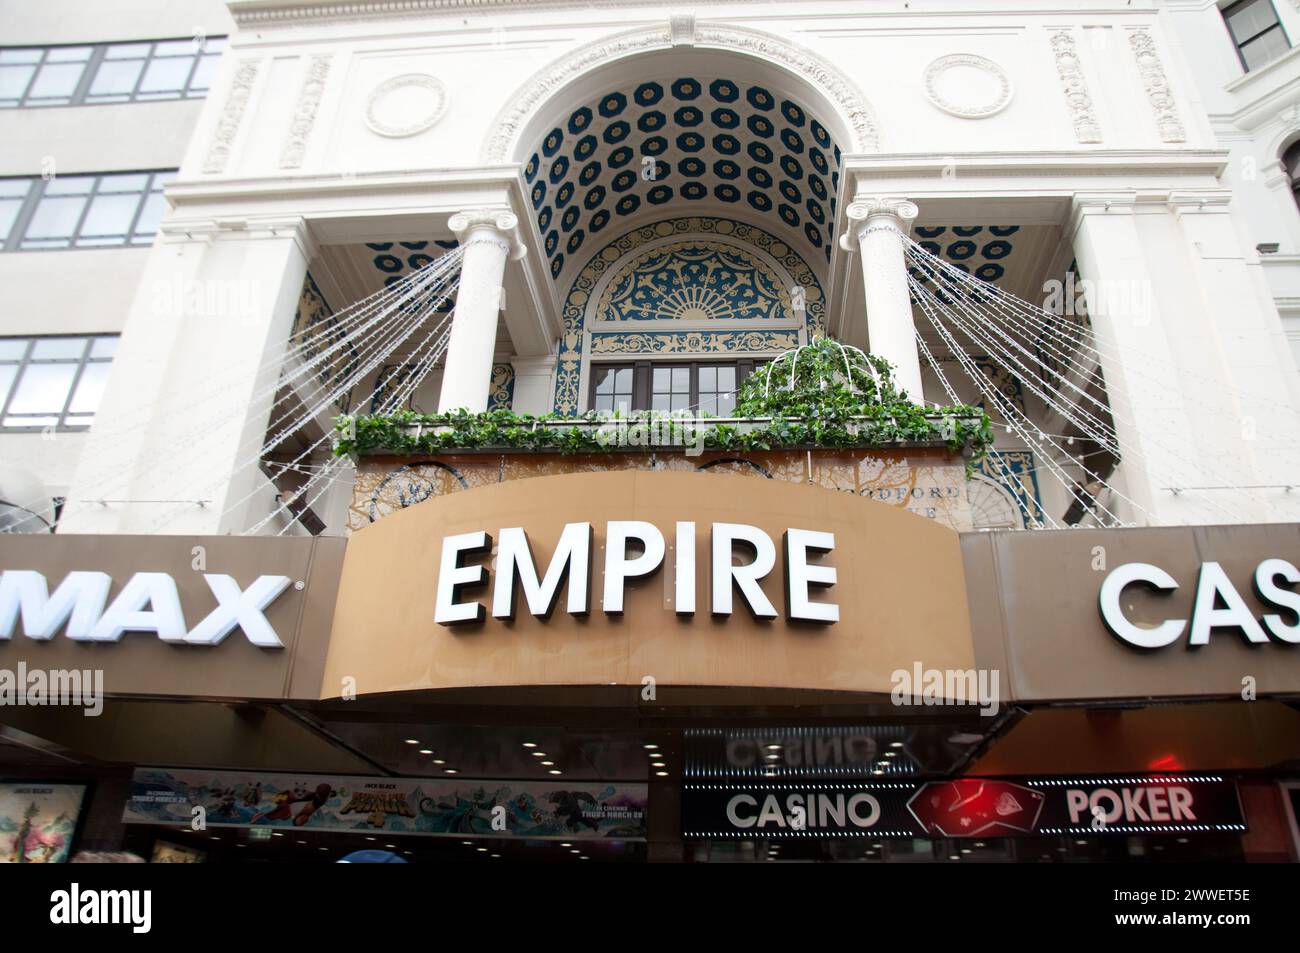 Empire Cinema and Casino, Leicester Square, City of Westminster, London, Großbritannien Stockfoto